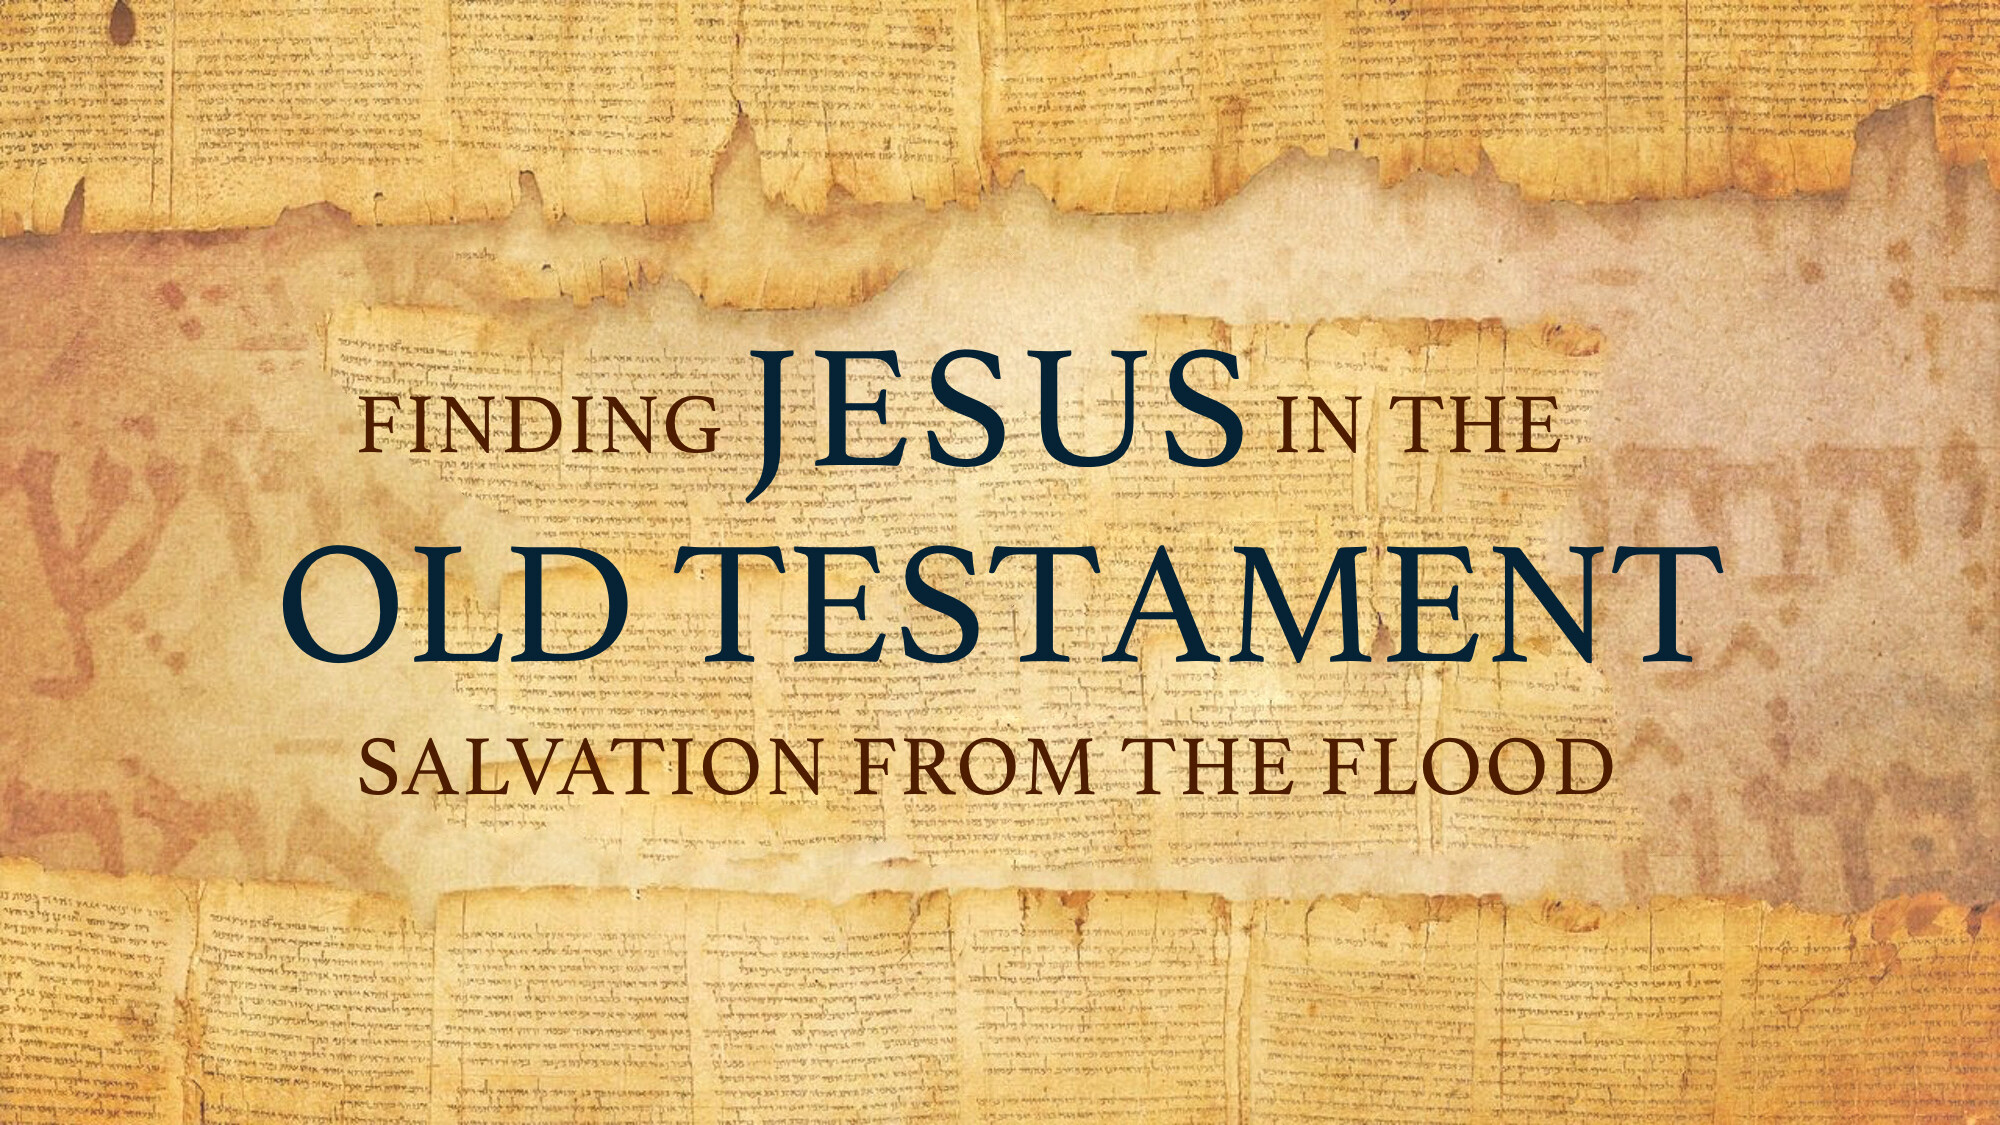 Salvation From the Flood